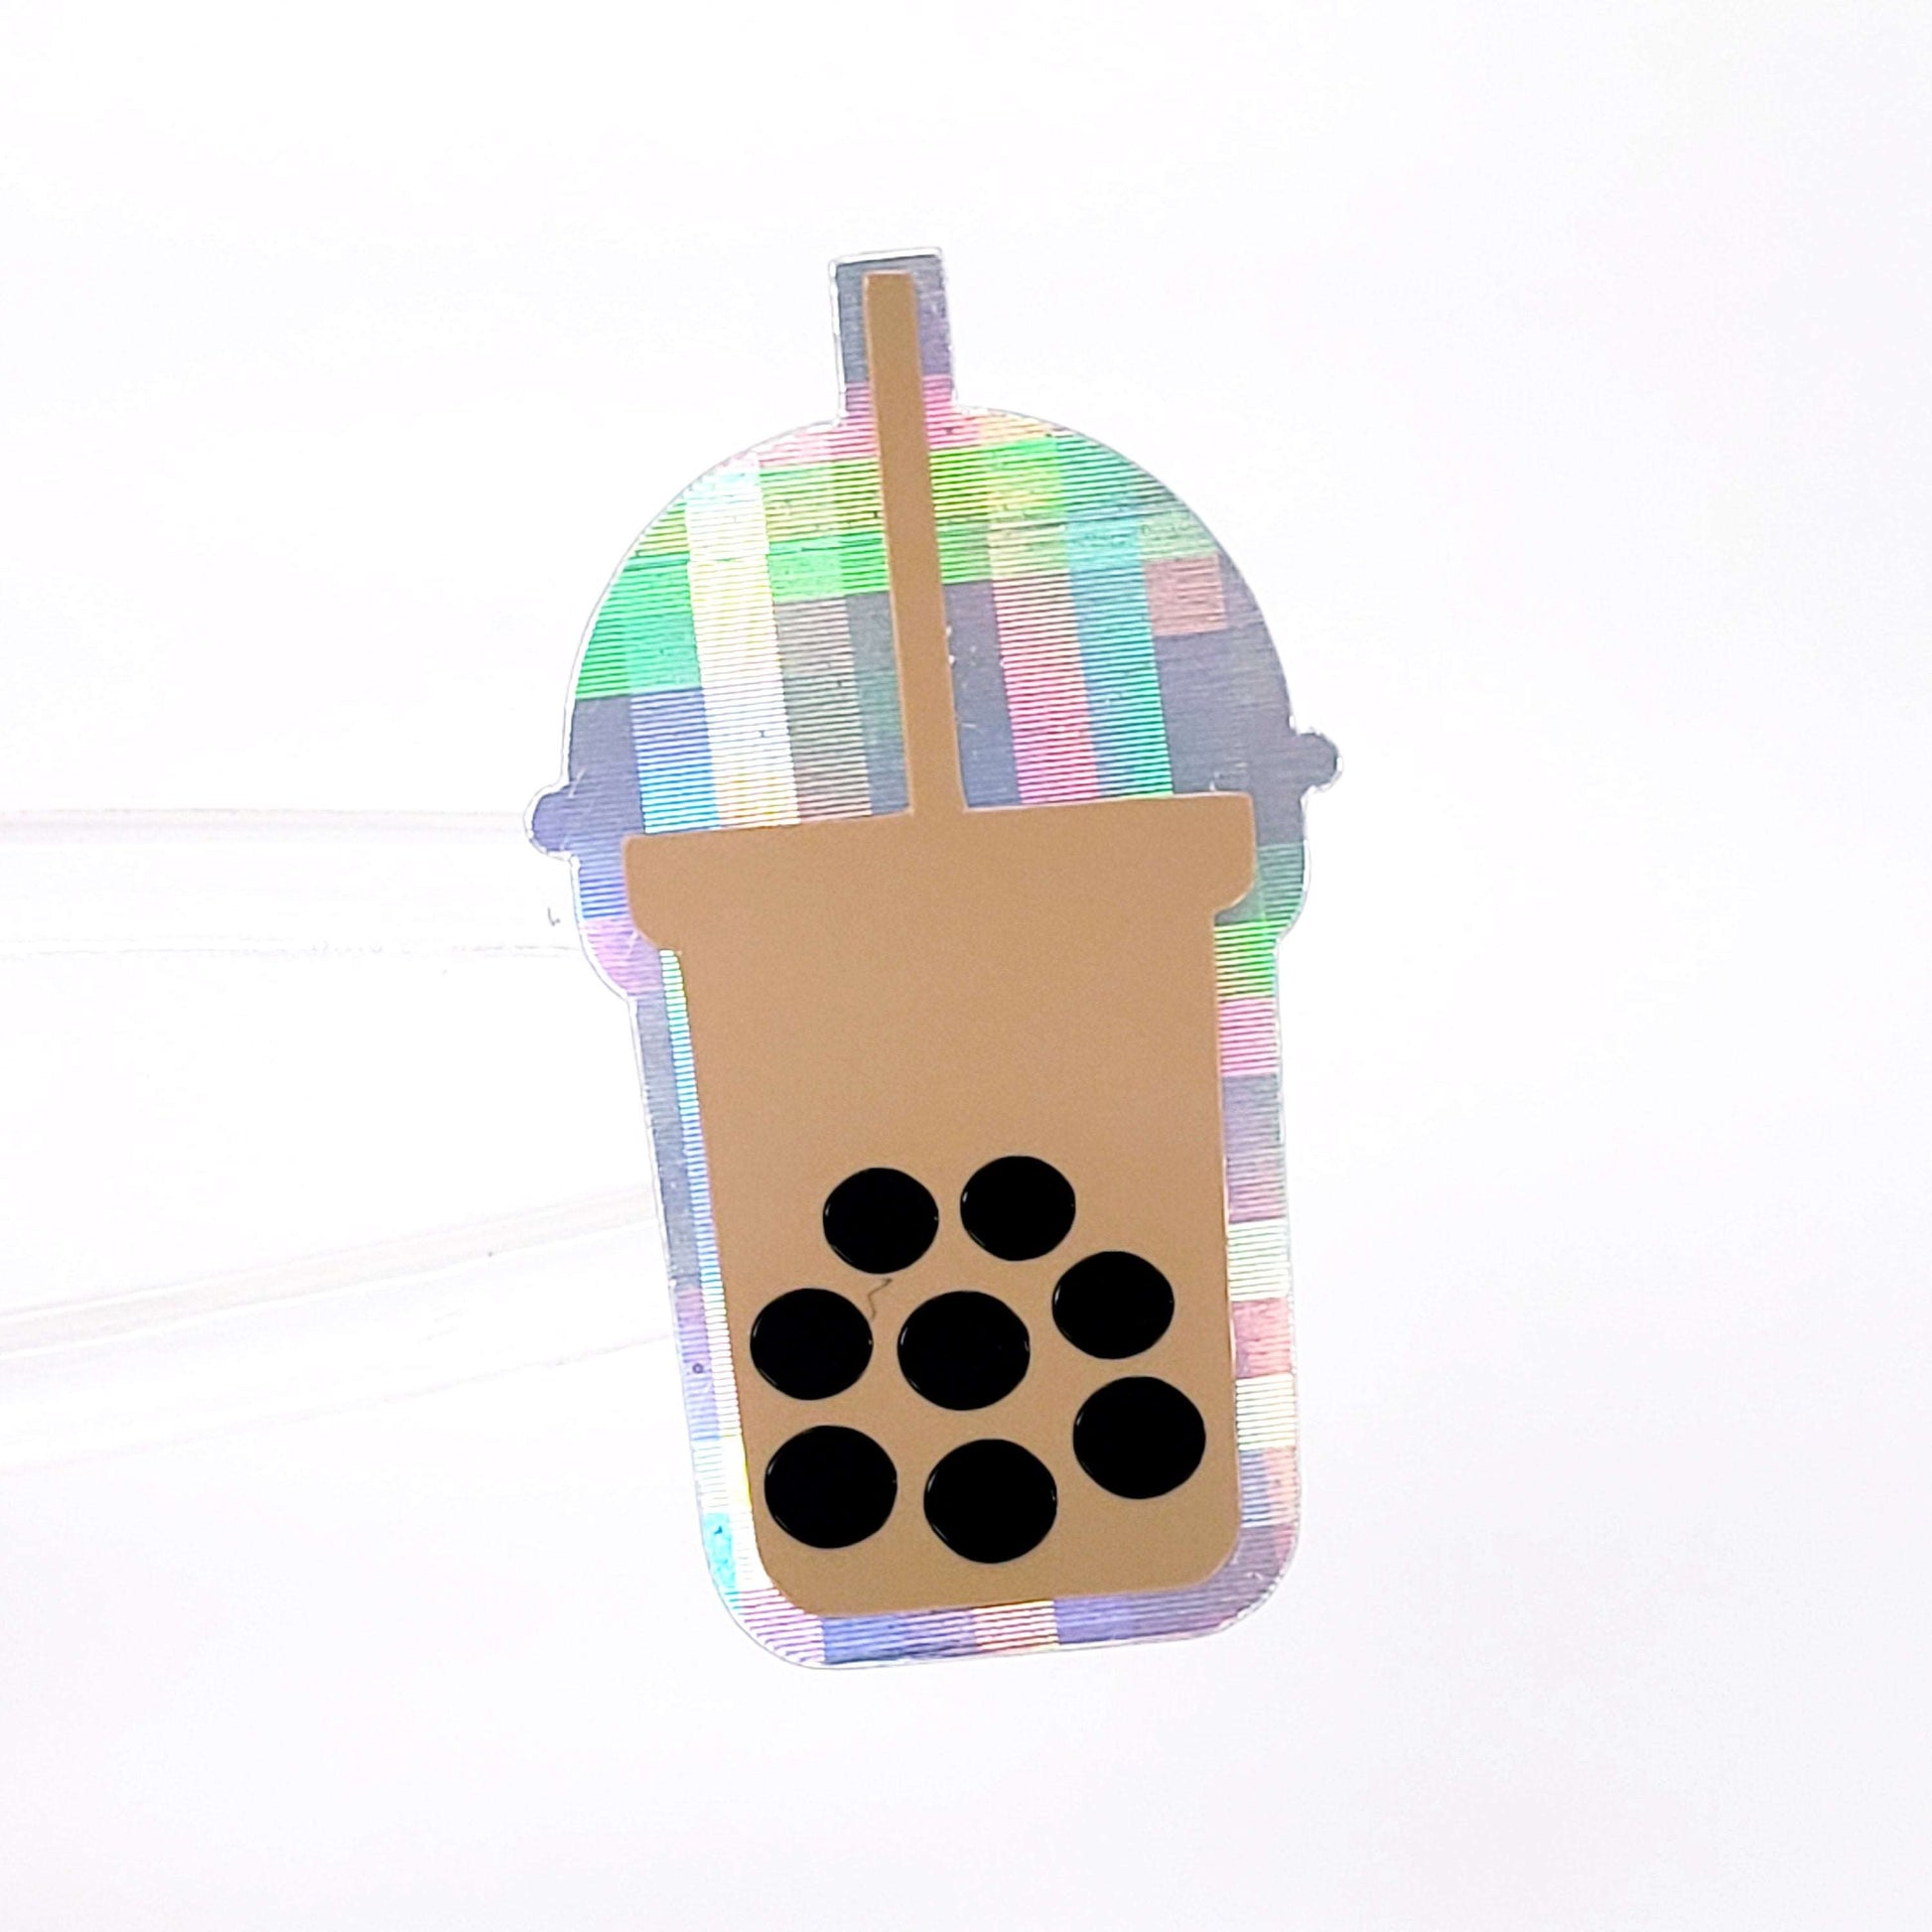 Boba Tea Stickers, set of 36 cute cold drink holographic stickers for calendars, journals, trackers, and planners. Bubble tea lover gift.